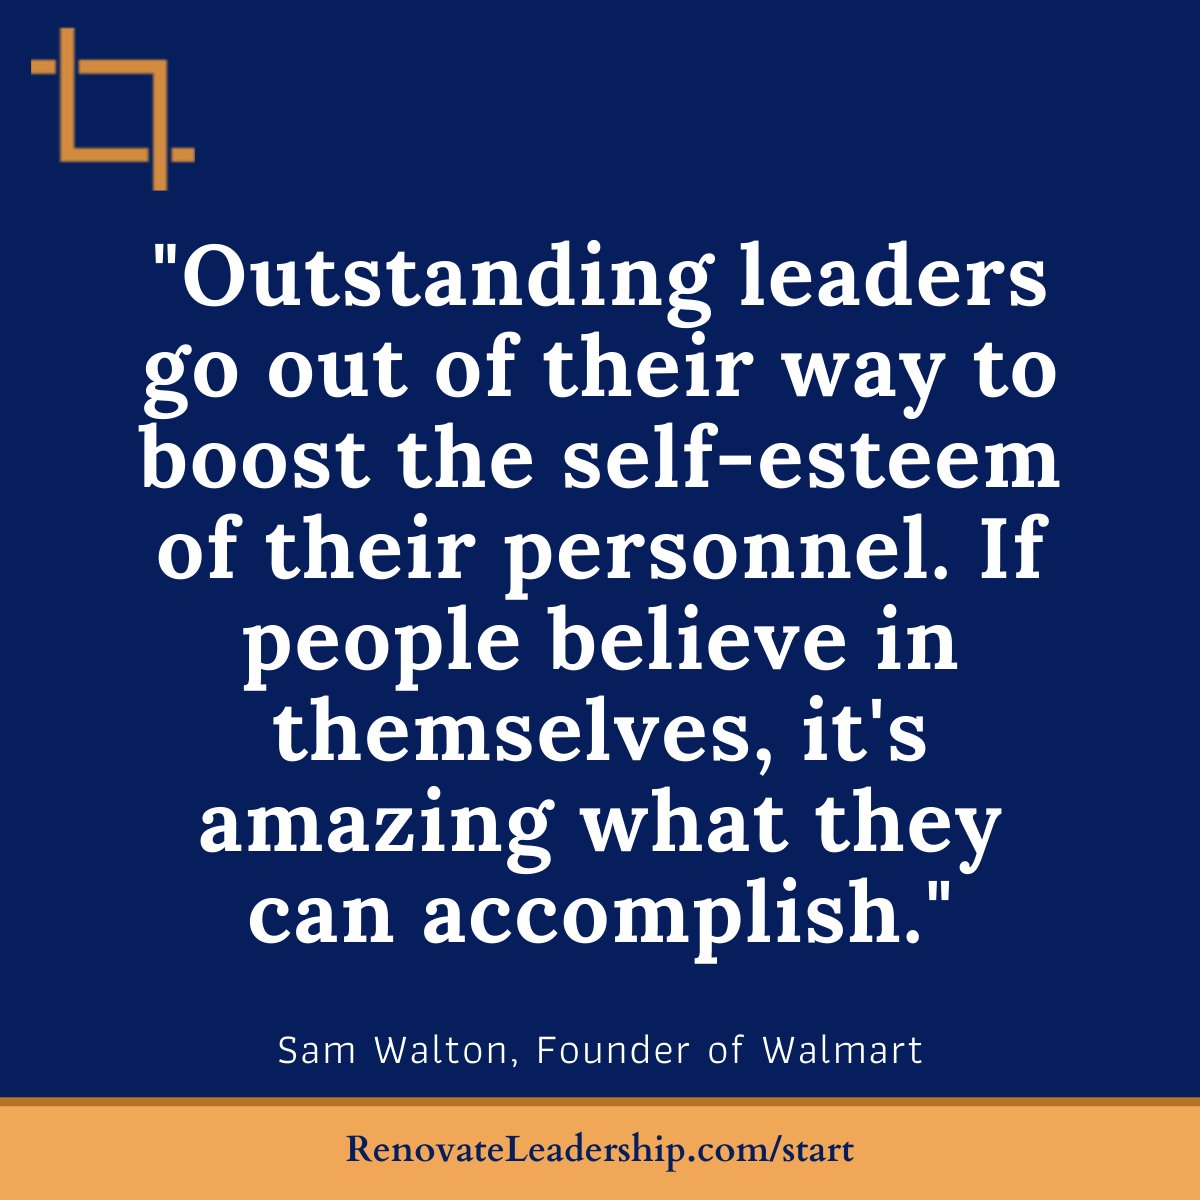 The power of self-esteem in success 💪 Uncover Sam Walton's insights on how boosting employee confidence can unlock their full potential. Believe and achieve! #EmployeeEmpowerment #RenovateLeadership #SystemAndSoul